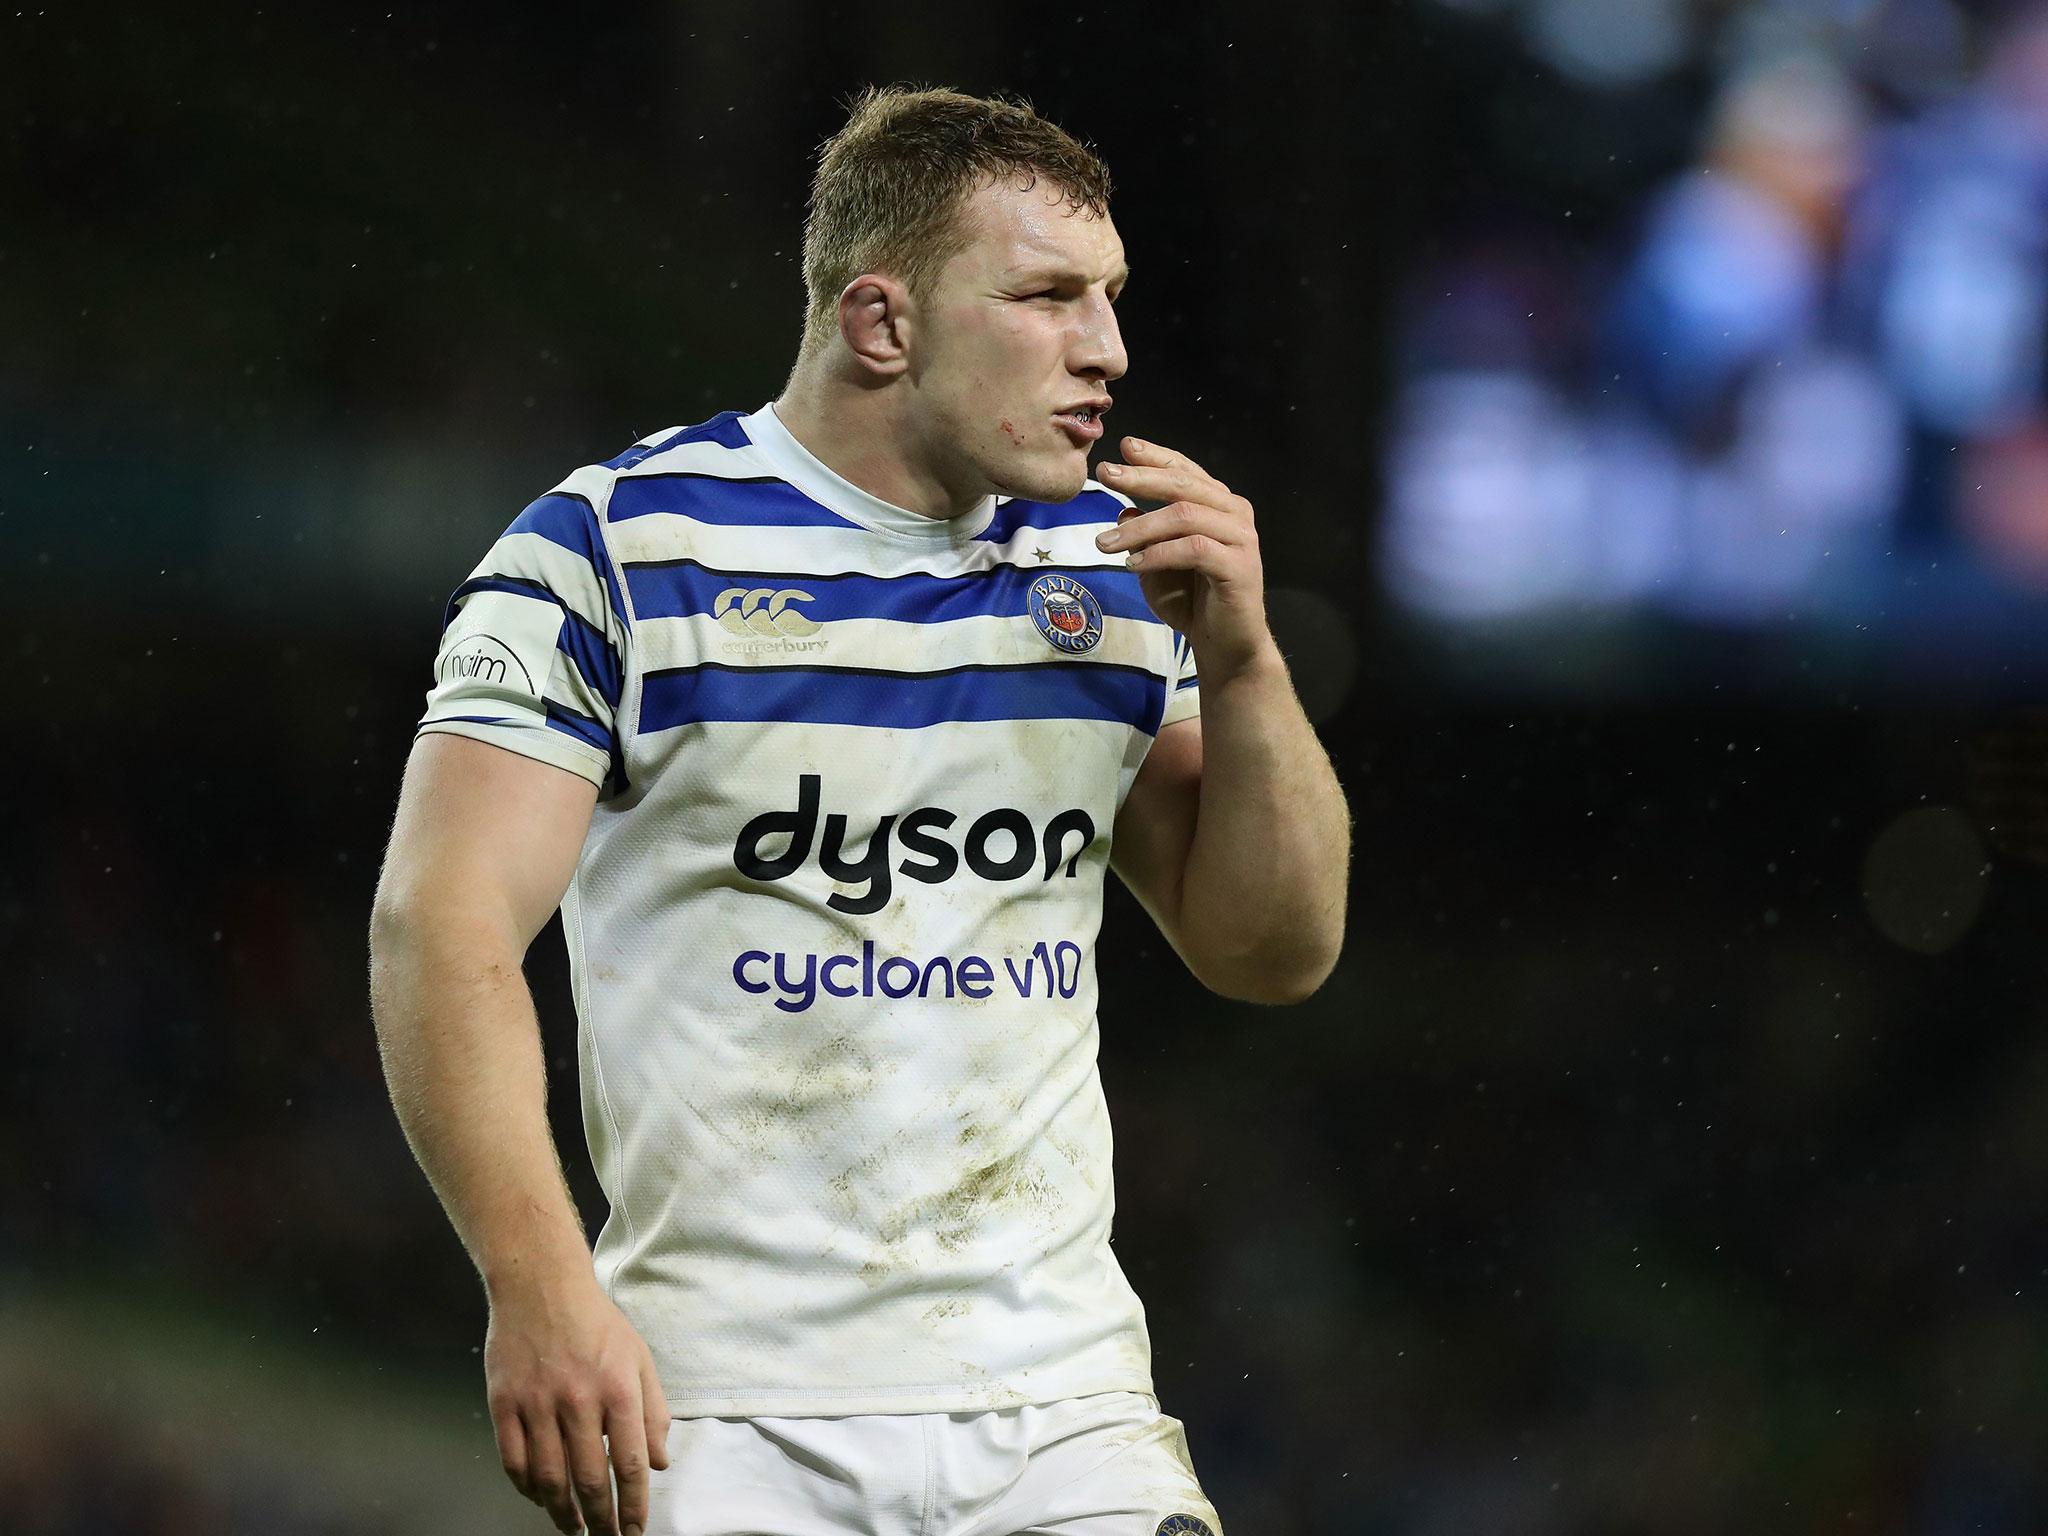 Sam Underhill will miss three months after ankle surgery, ruling him out of the Six Nations